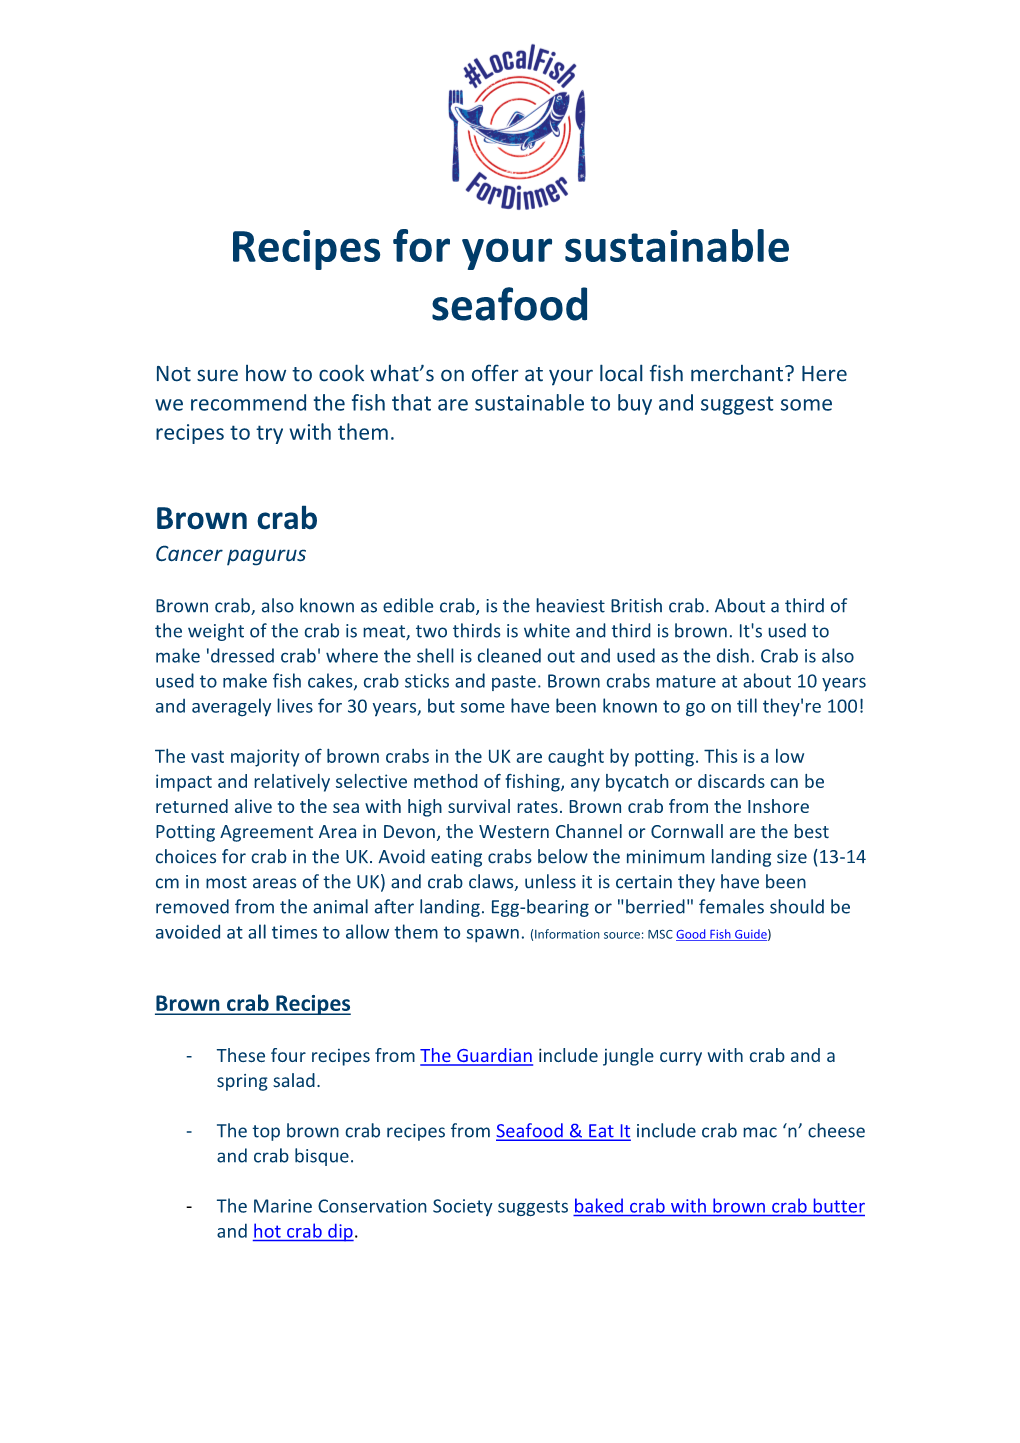 Recipes for Your Sustainable Seafood